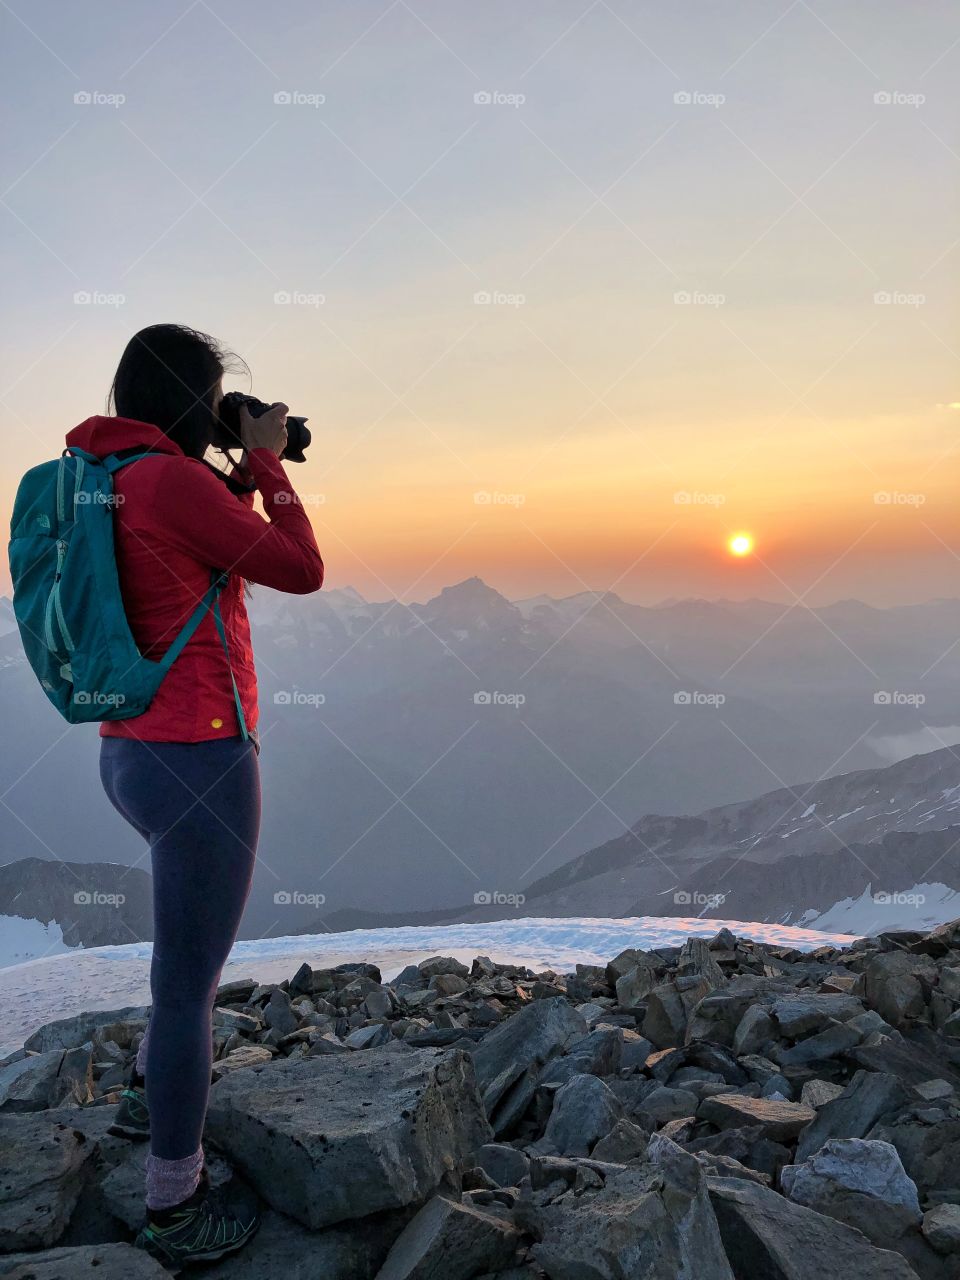 Capturing an incredible sunrise at 10,000ft among the peaks and glaciers in one of the most incredible places in the world